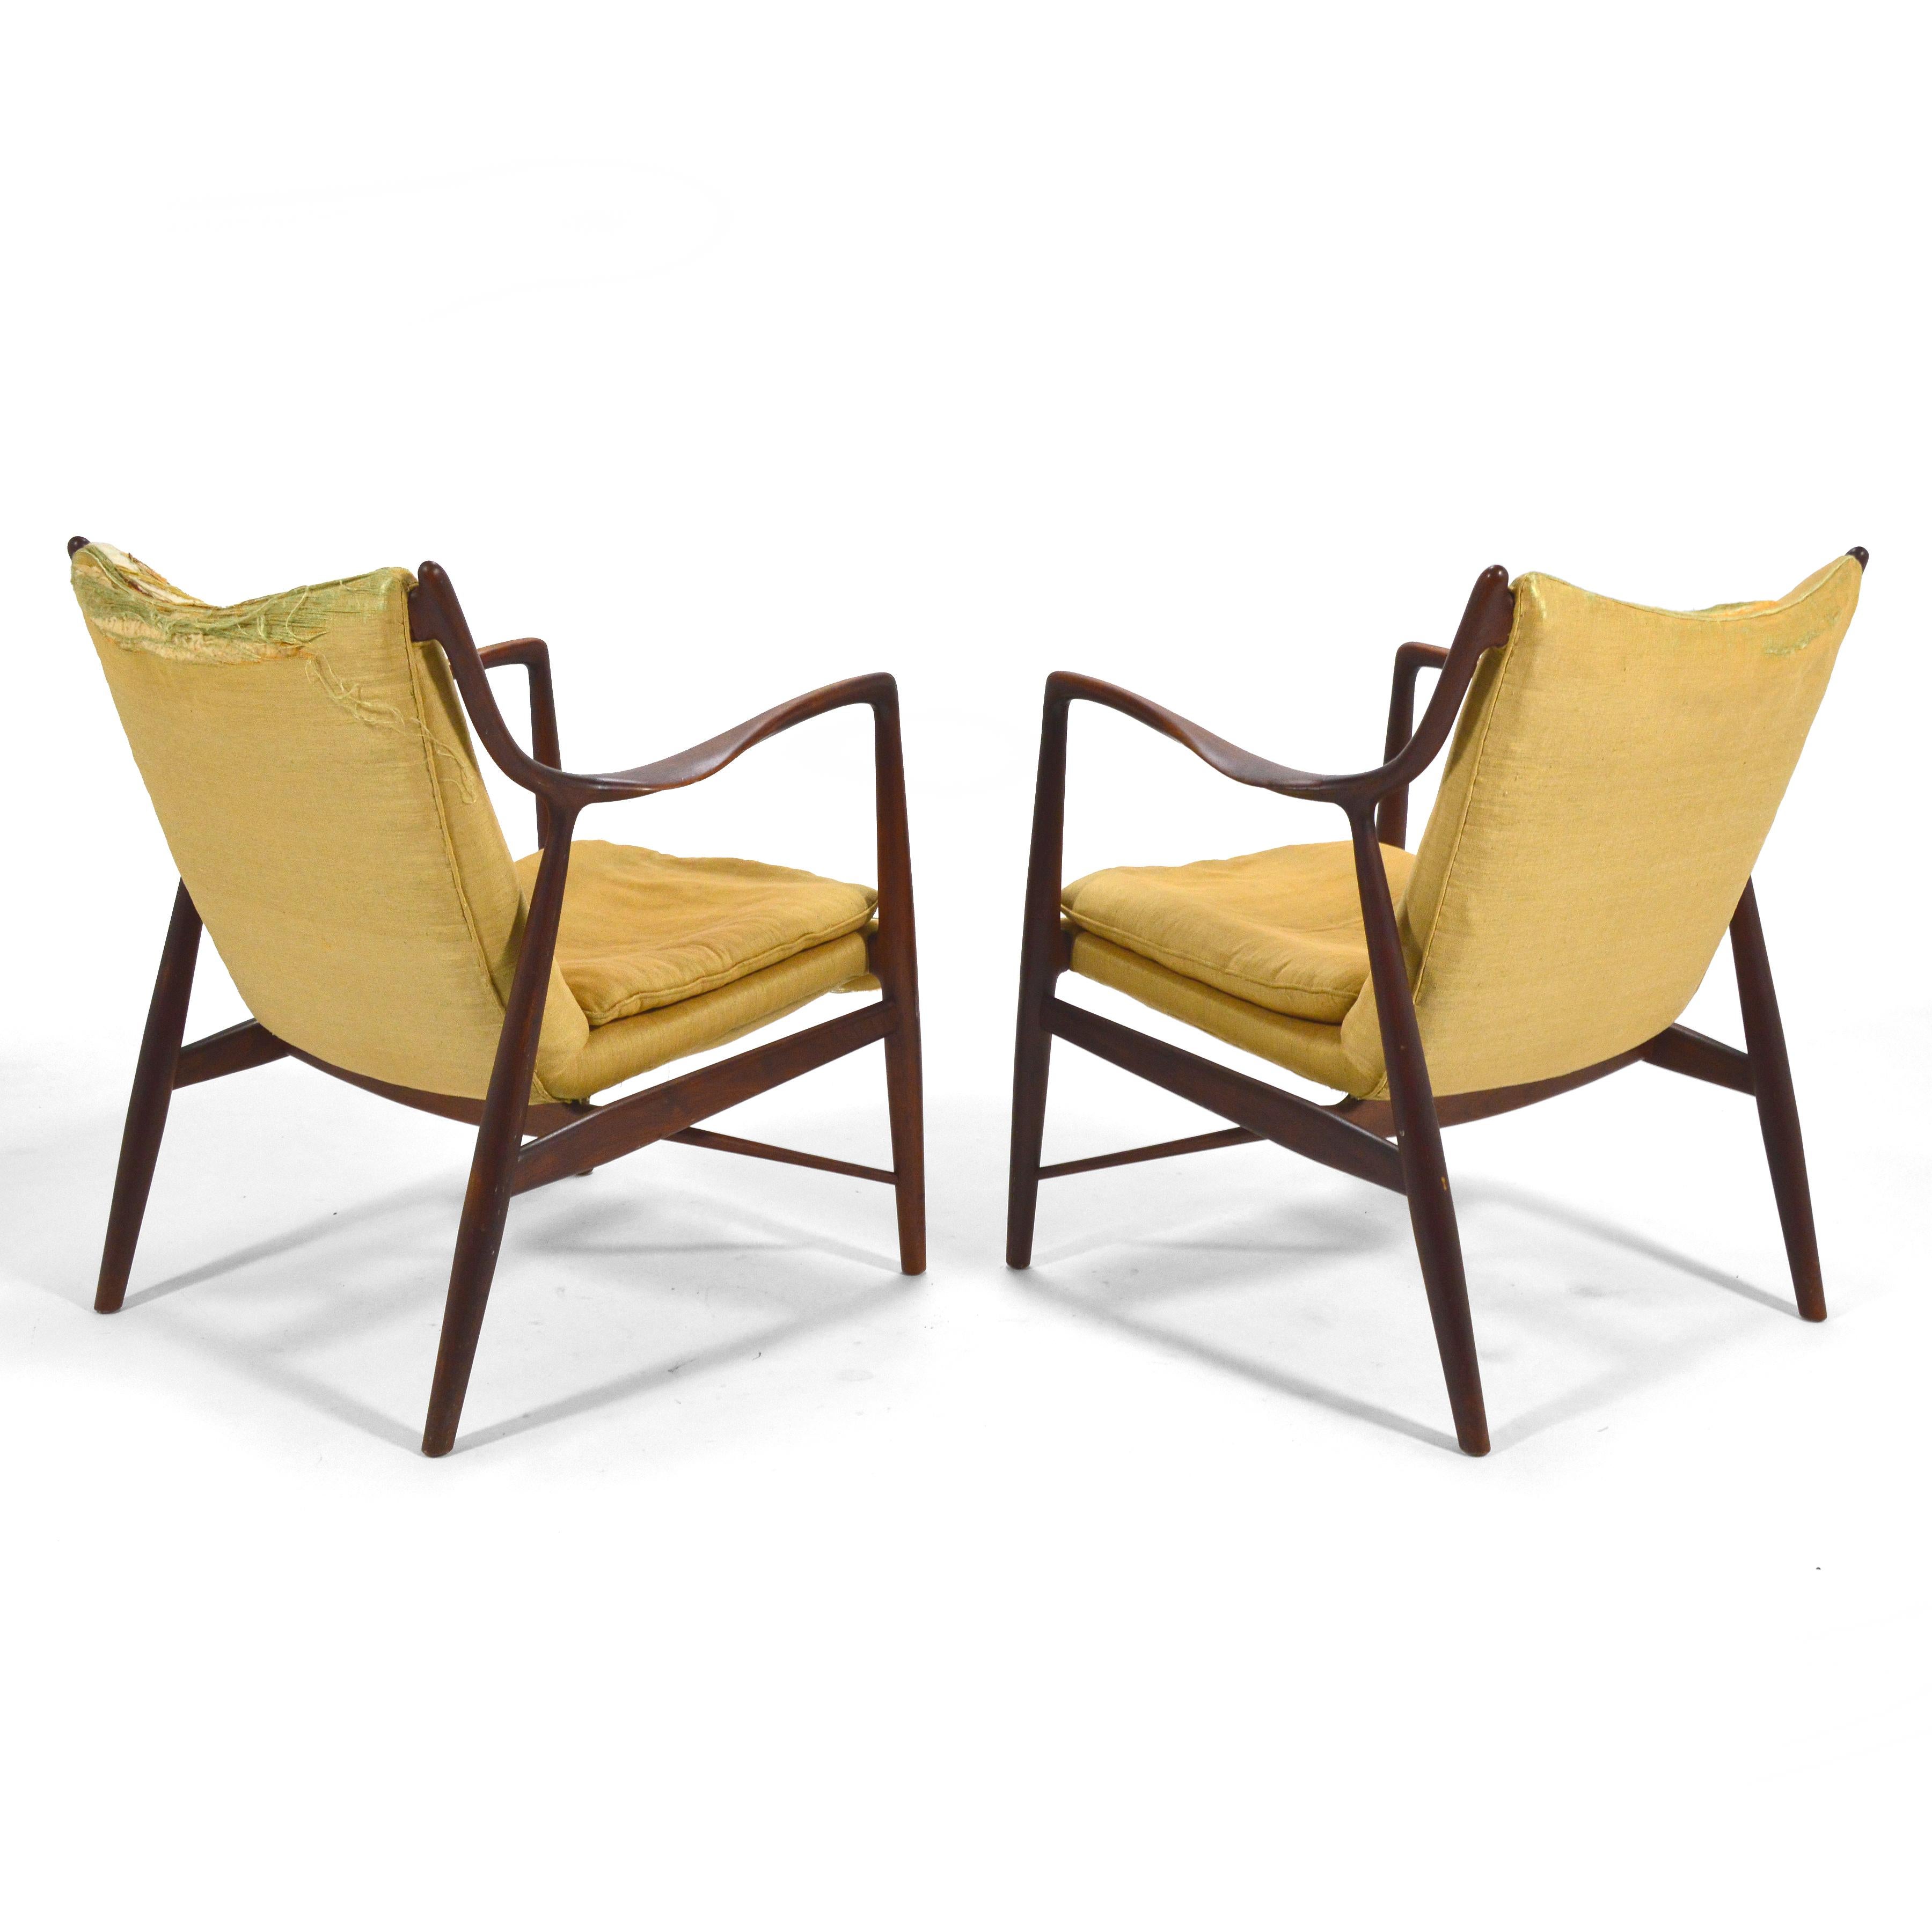 American Pair of Finn Juhl #45 Chairs by Baker For Sale